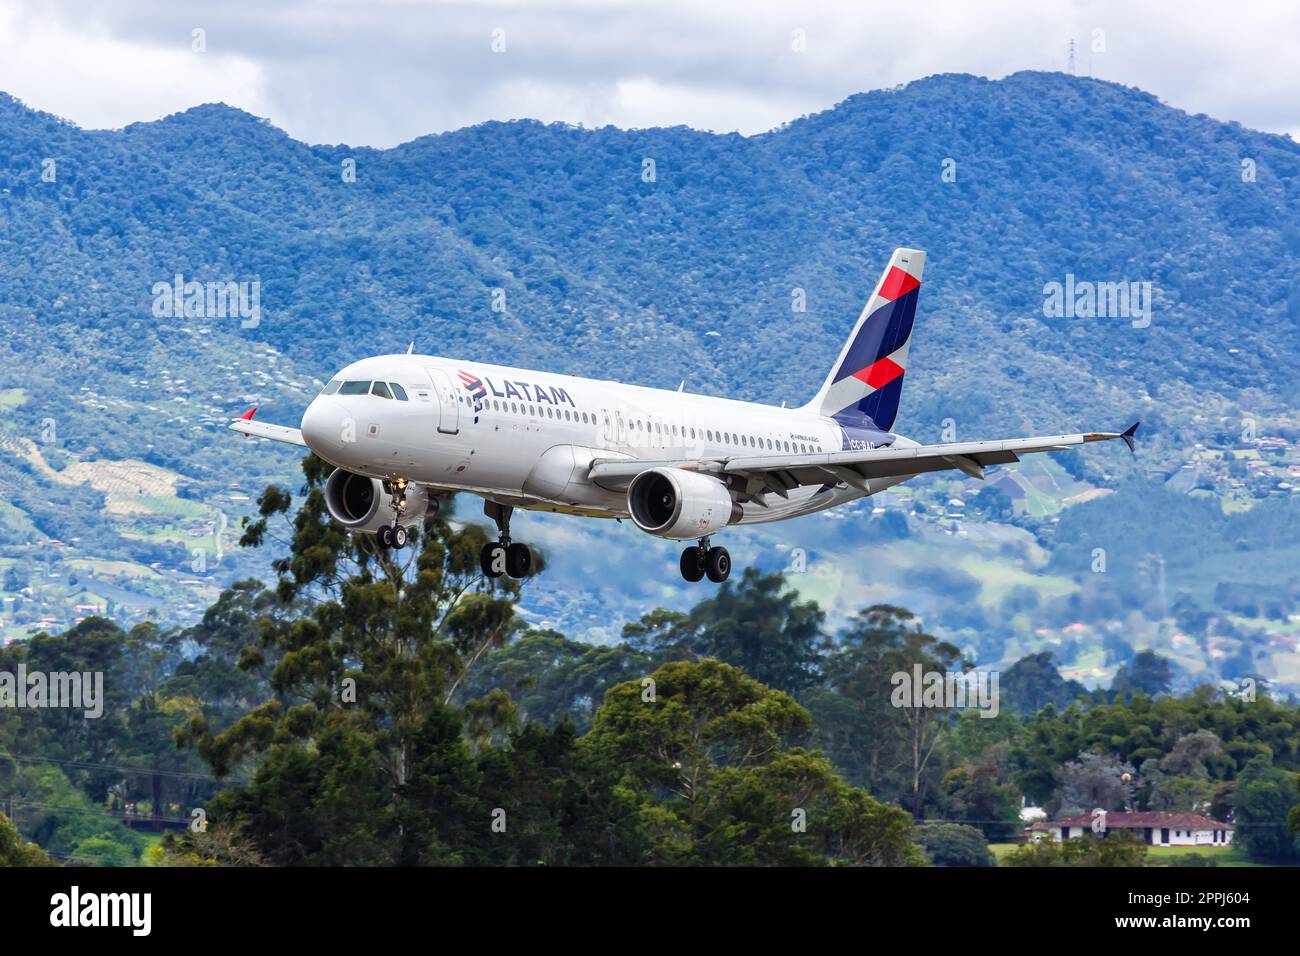 Latam airlines brasil hi-res stock photography and images - Alamy